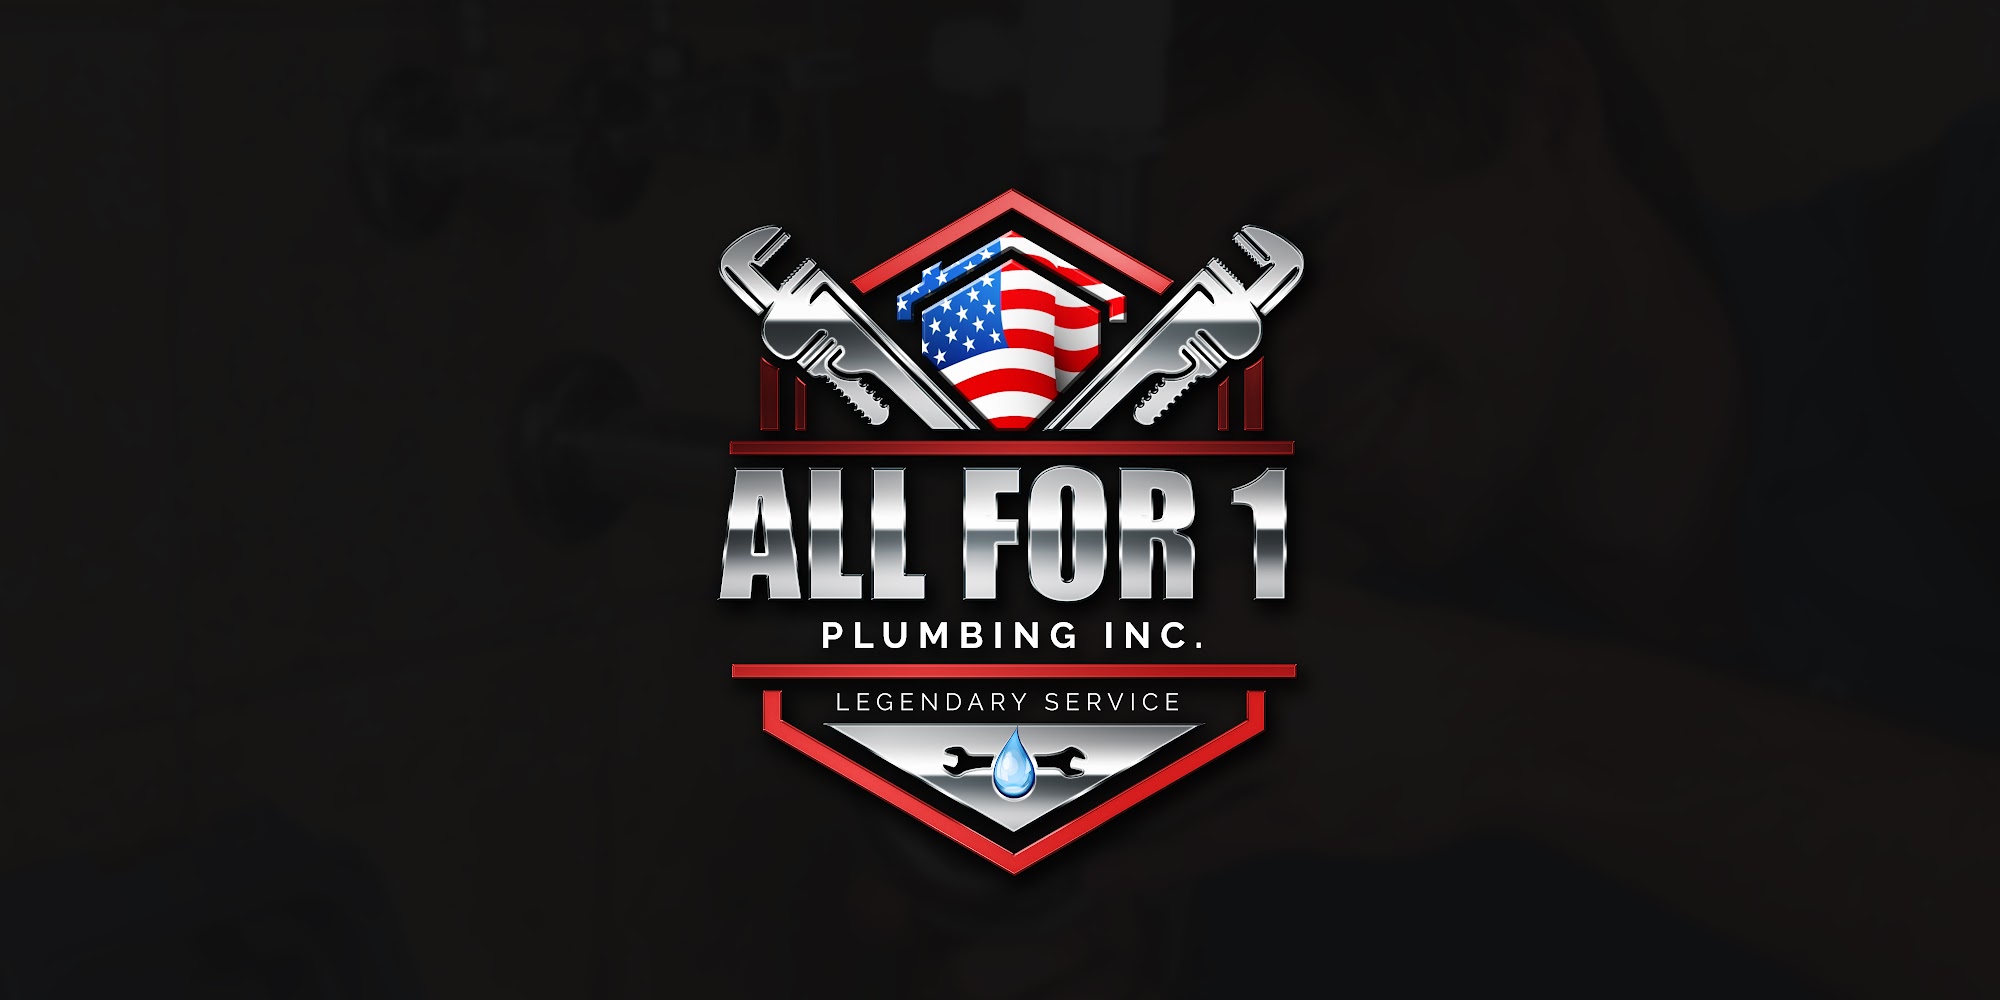 All for 1 Plumbing Inc.